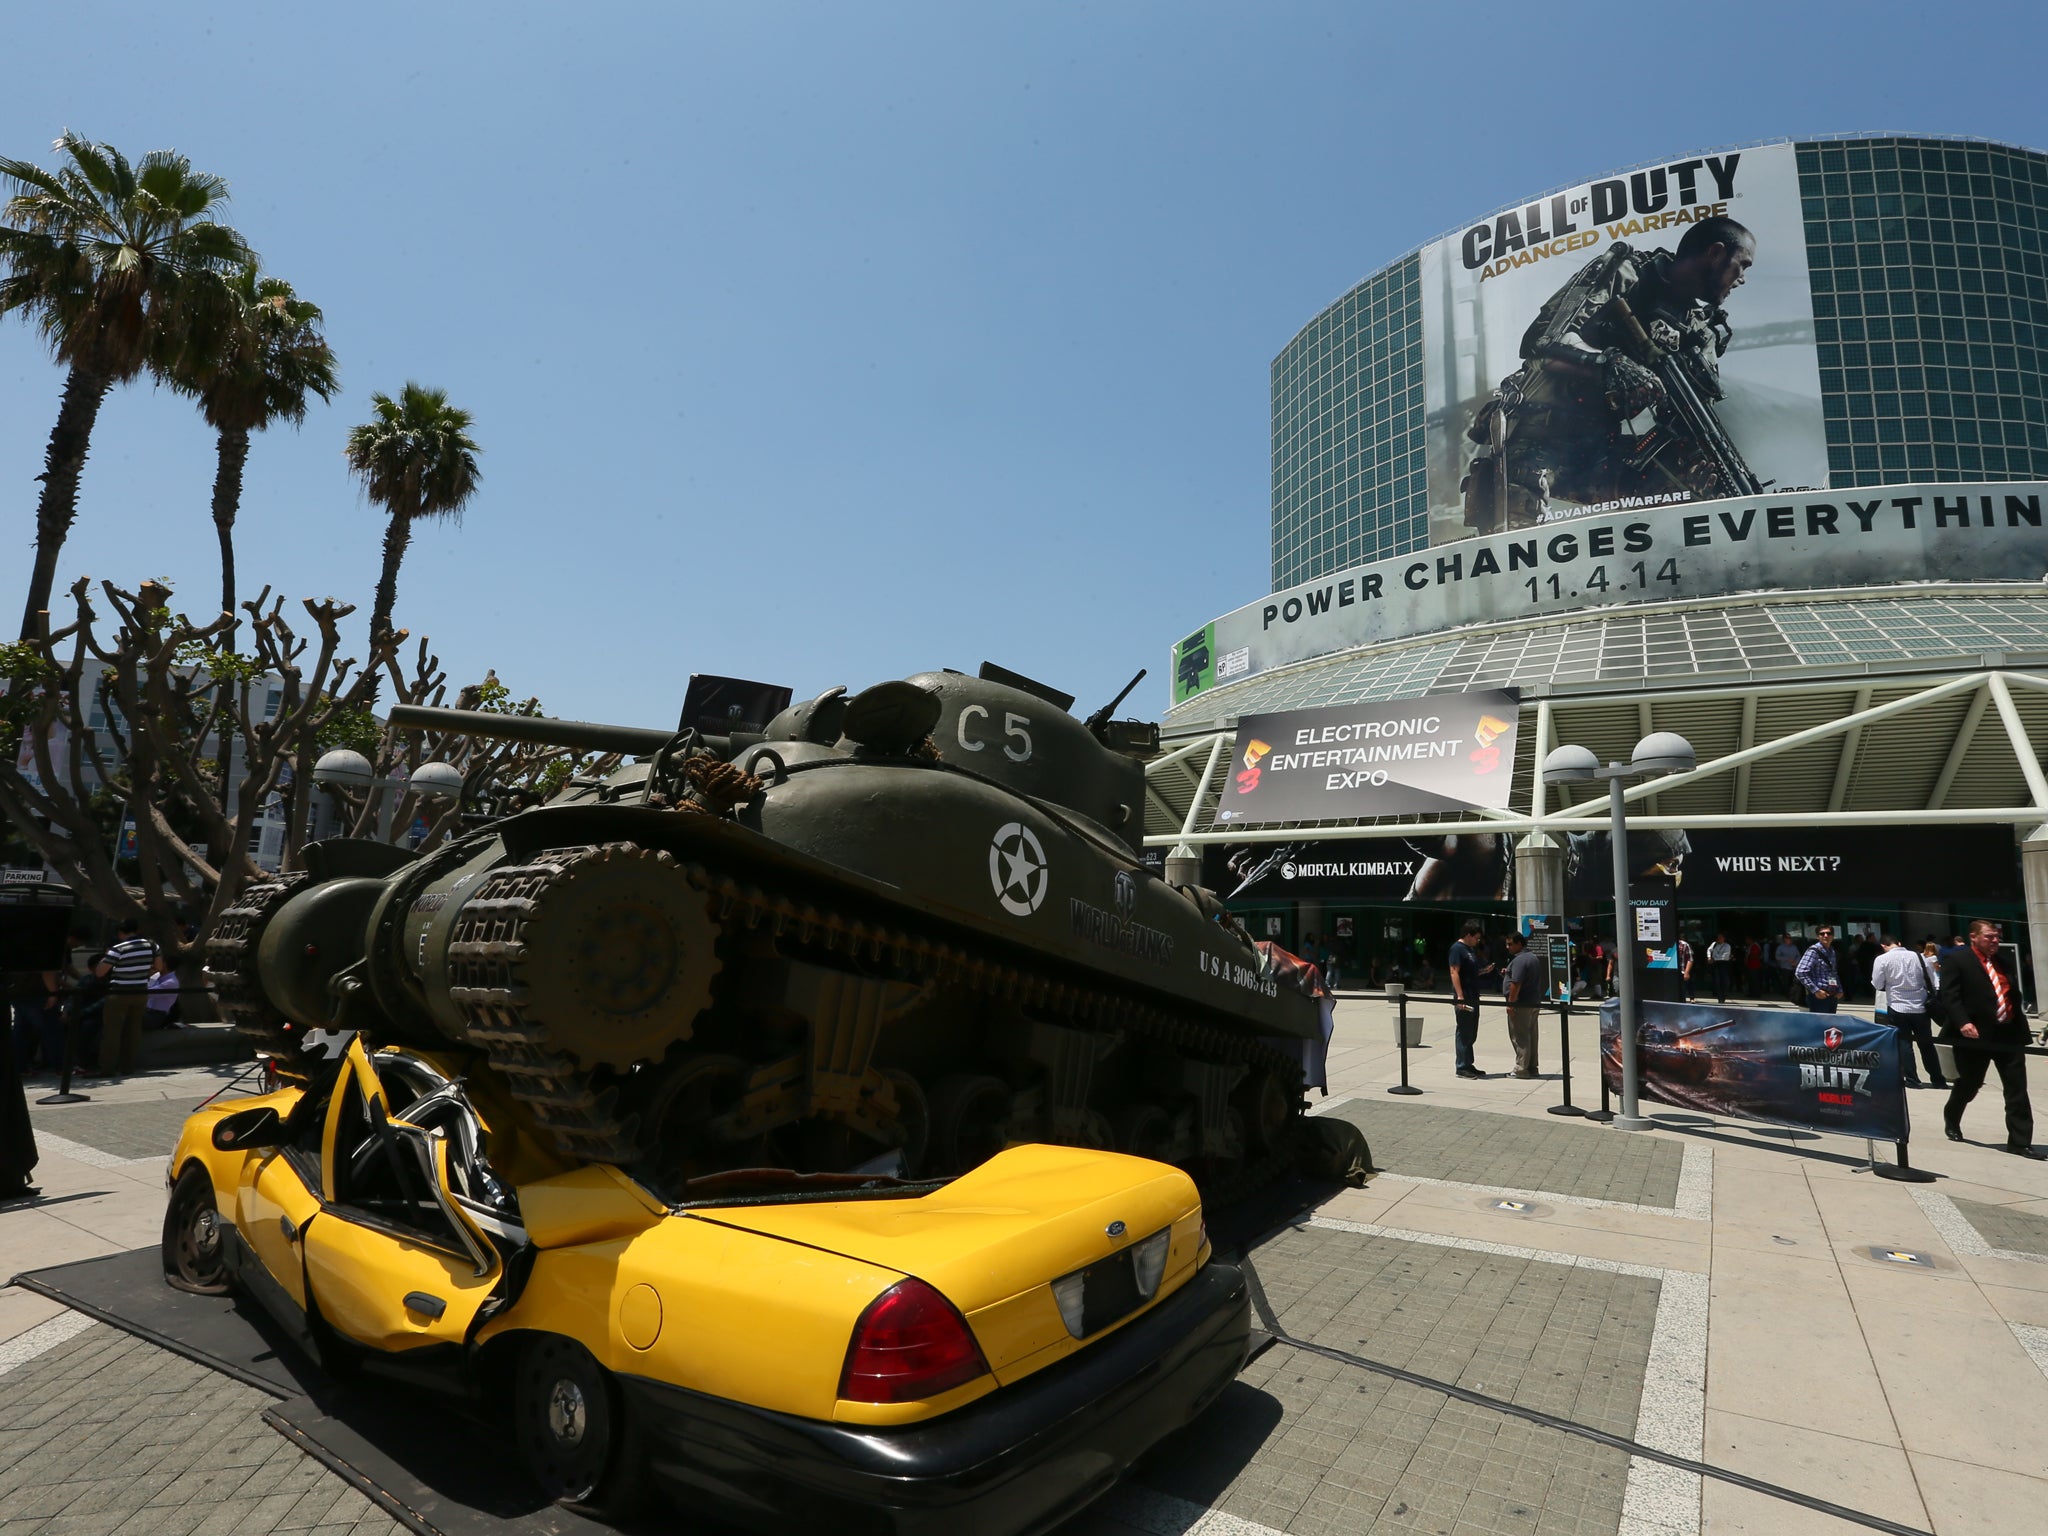 The view outside the Los Angeles Convention Centre, where E3 is held, in 2014